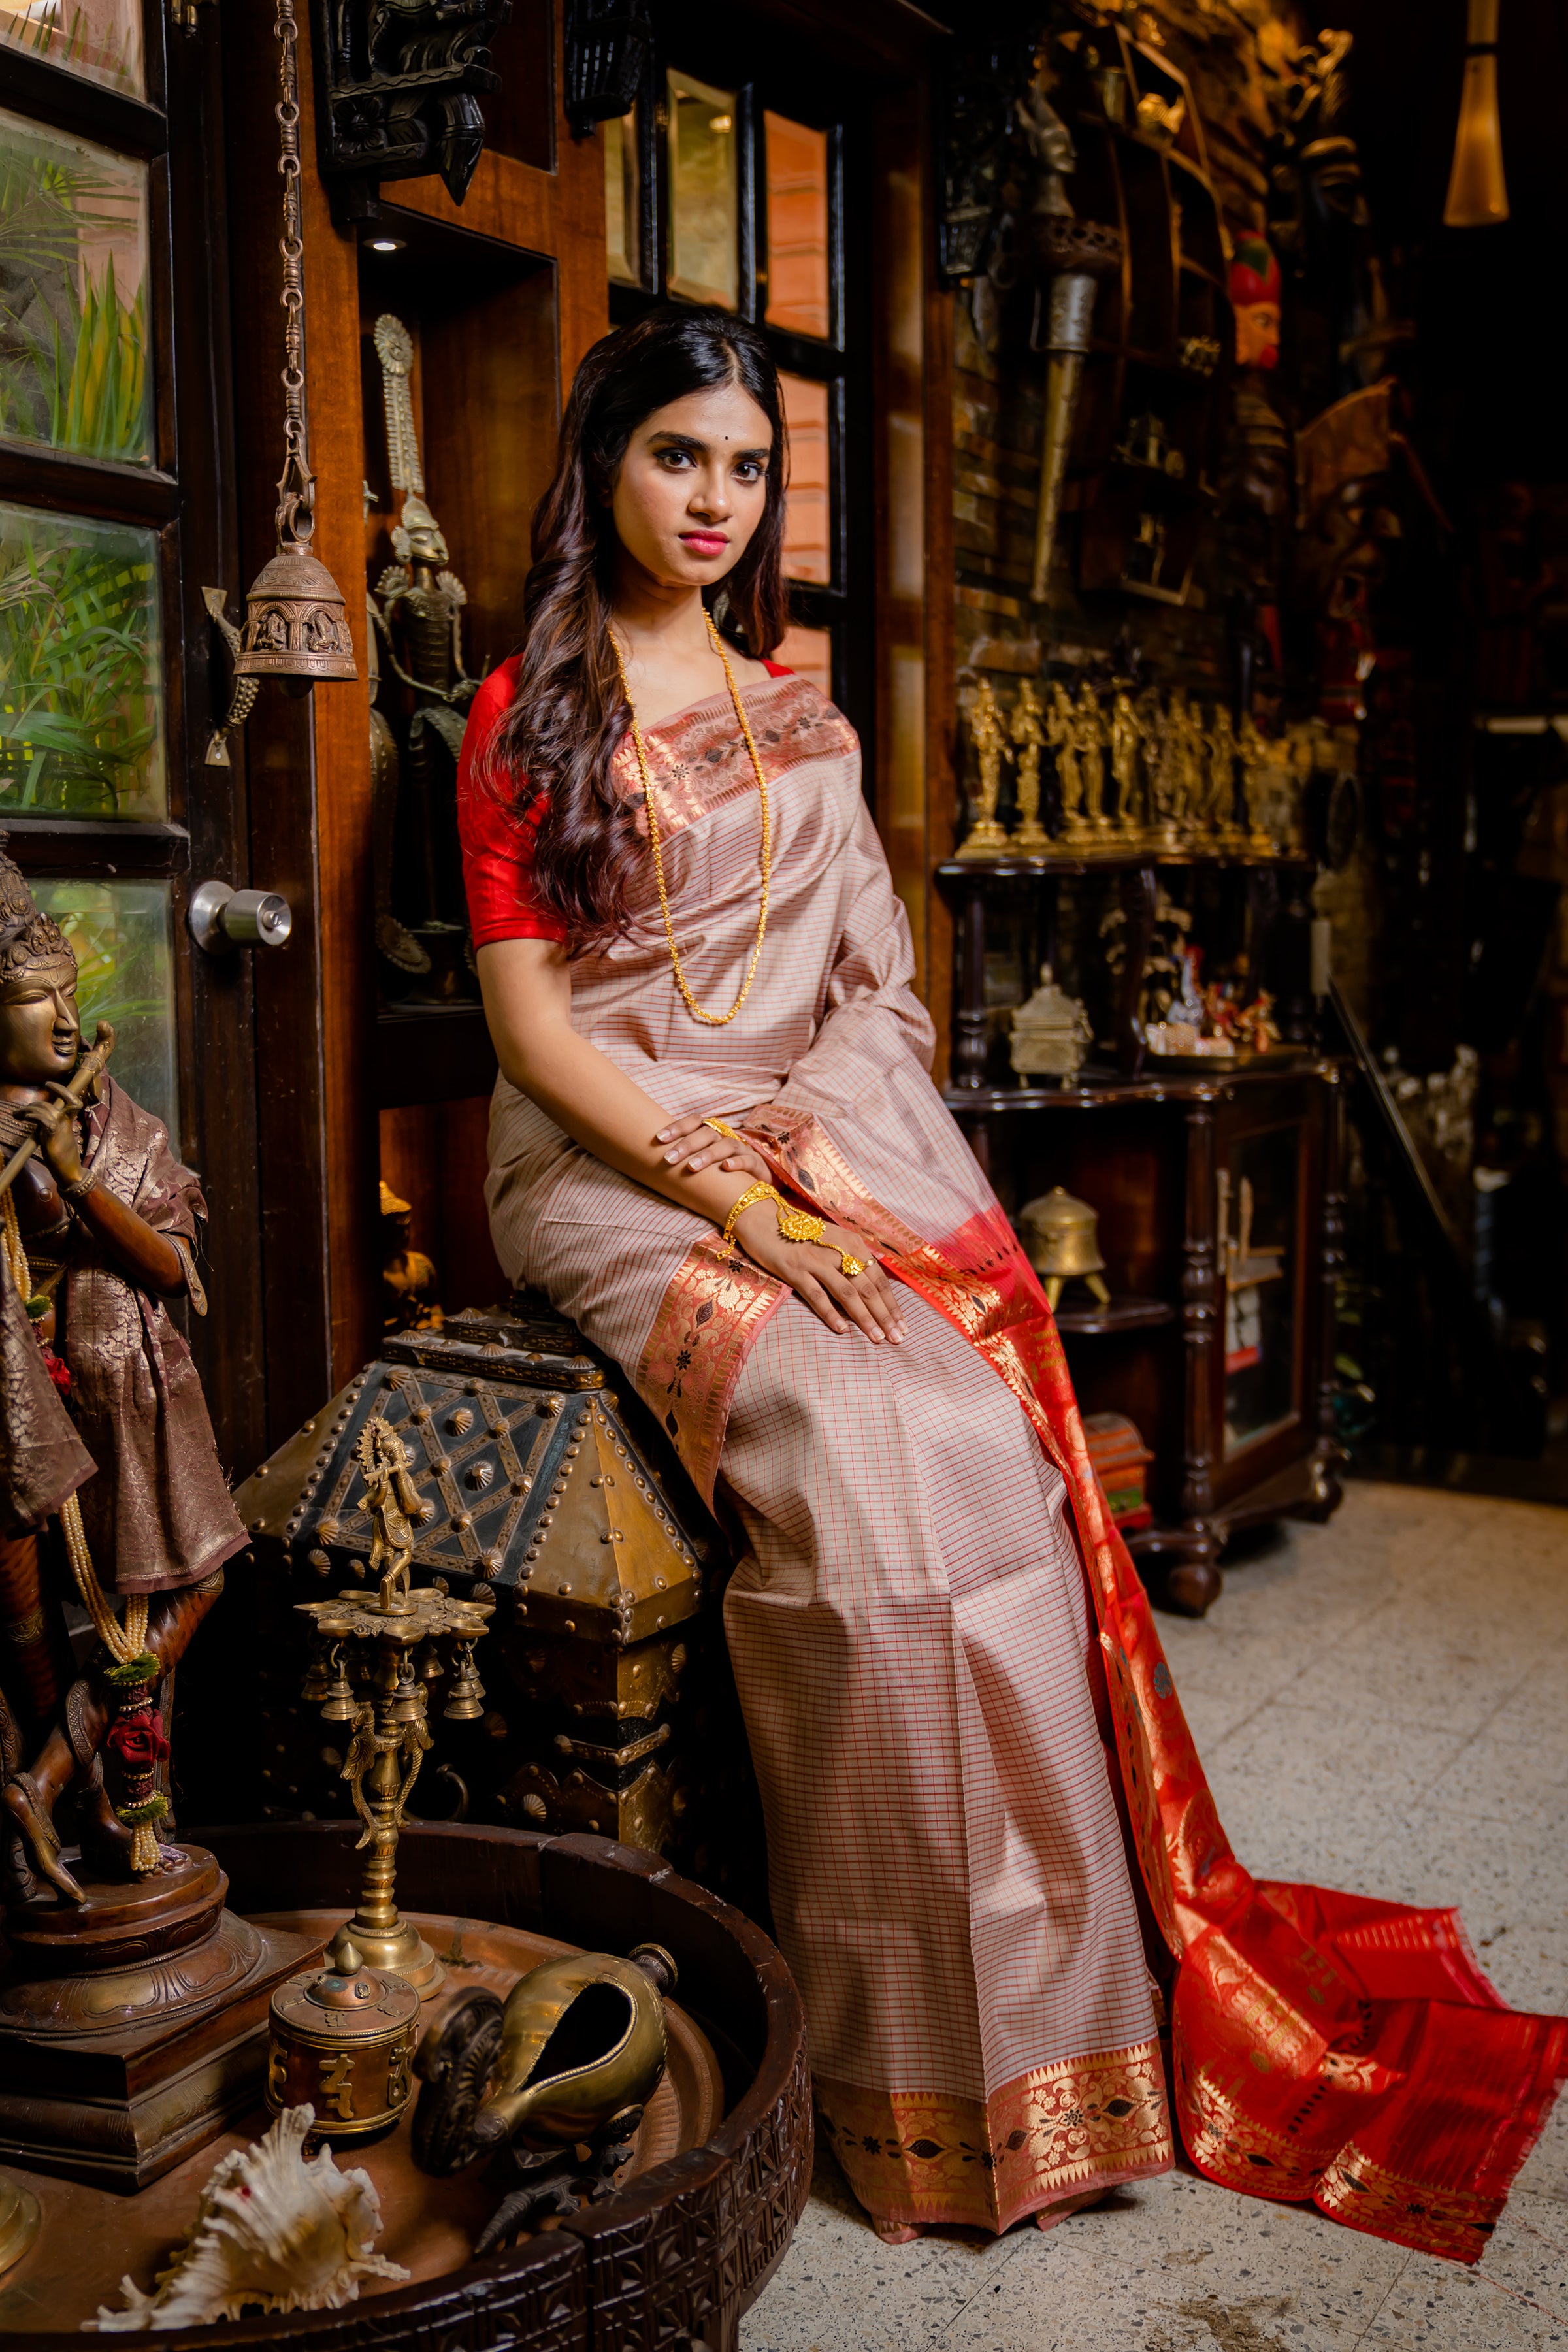 Swarnachuri in beige and red with a grand palla